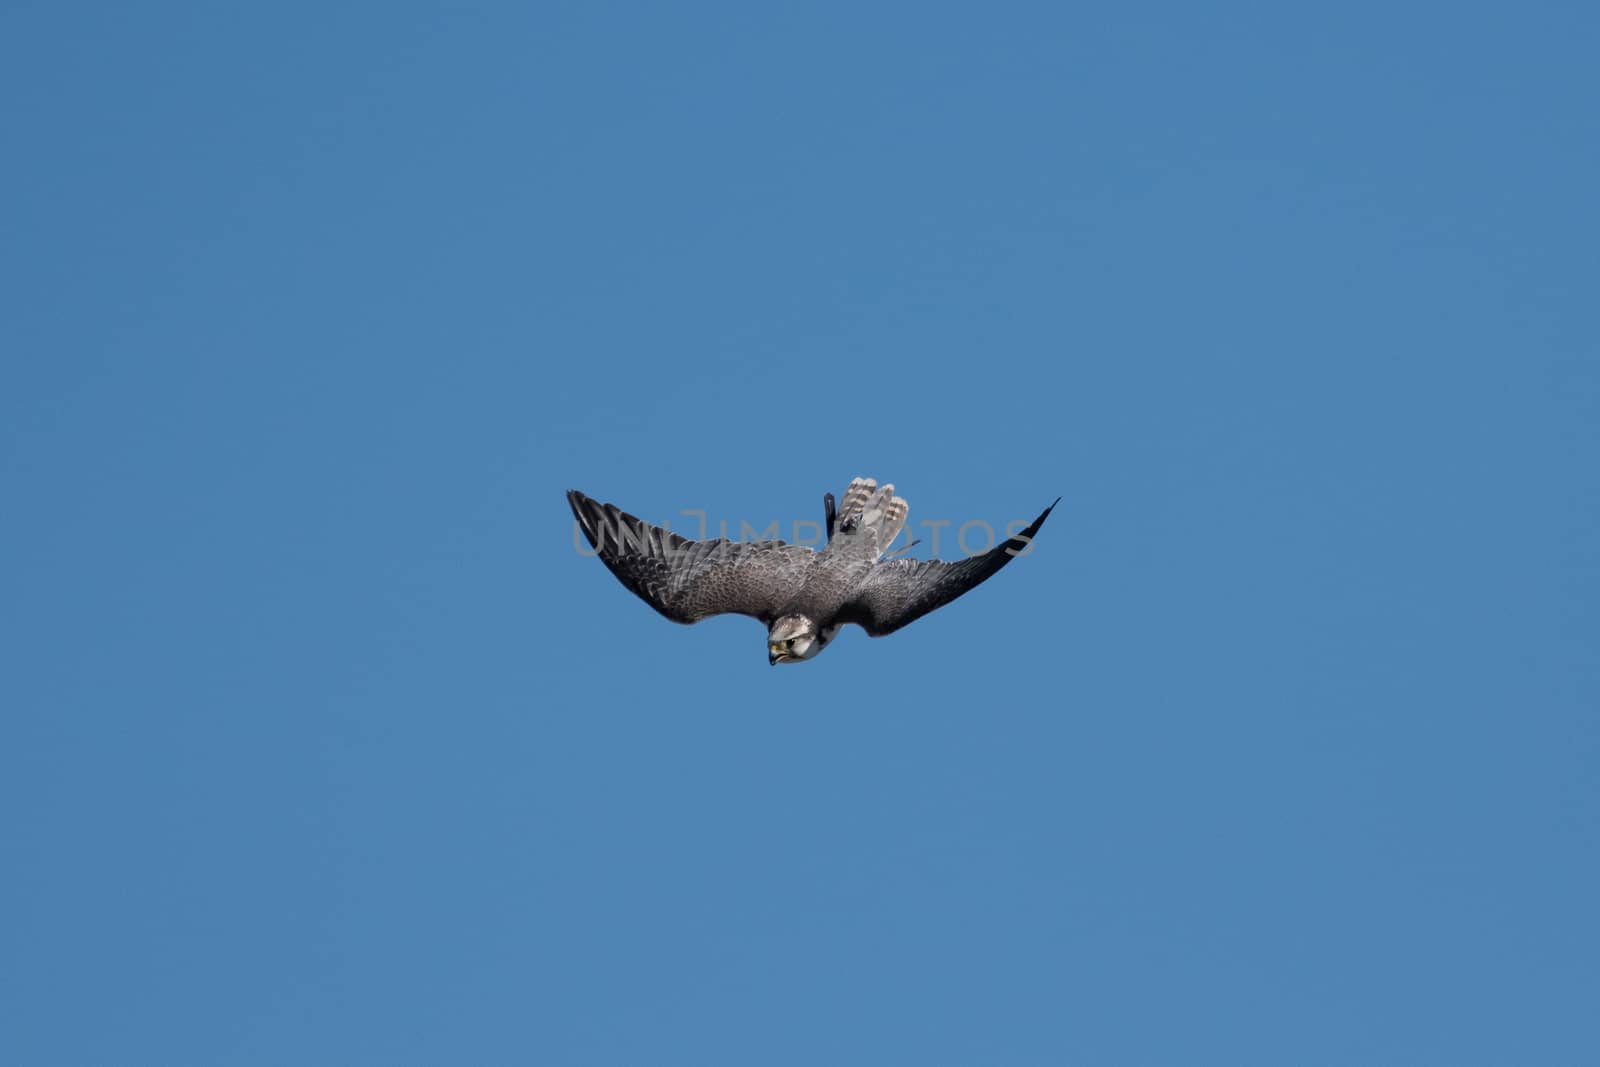 A gyrfalcon in sting flight by raphtong